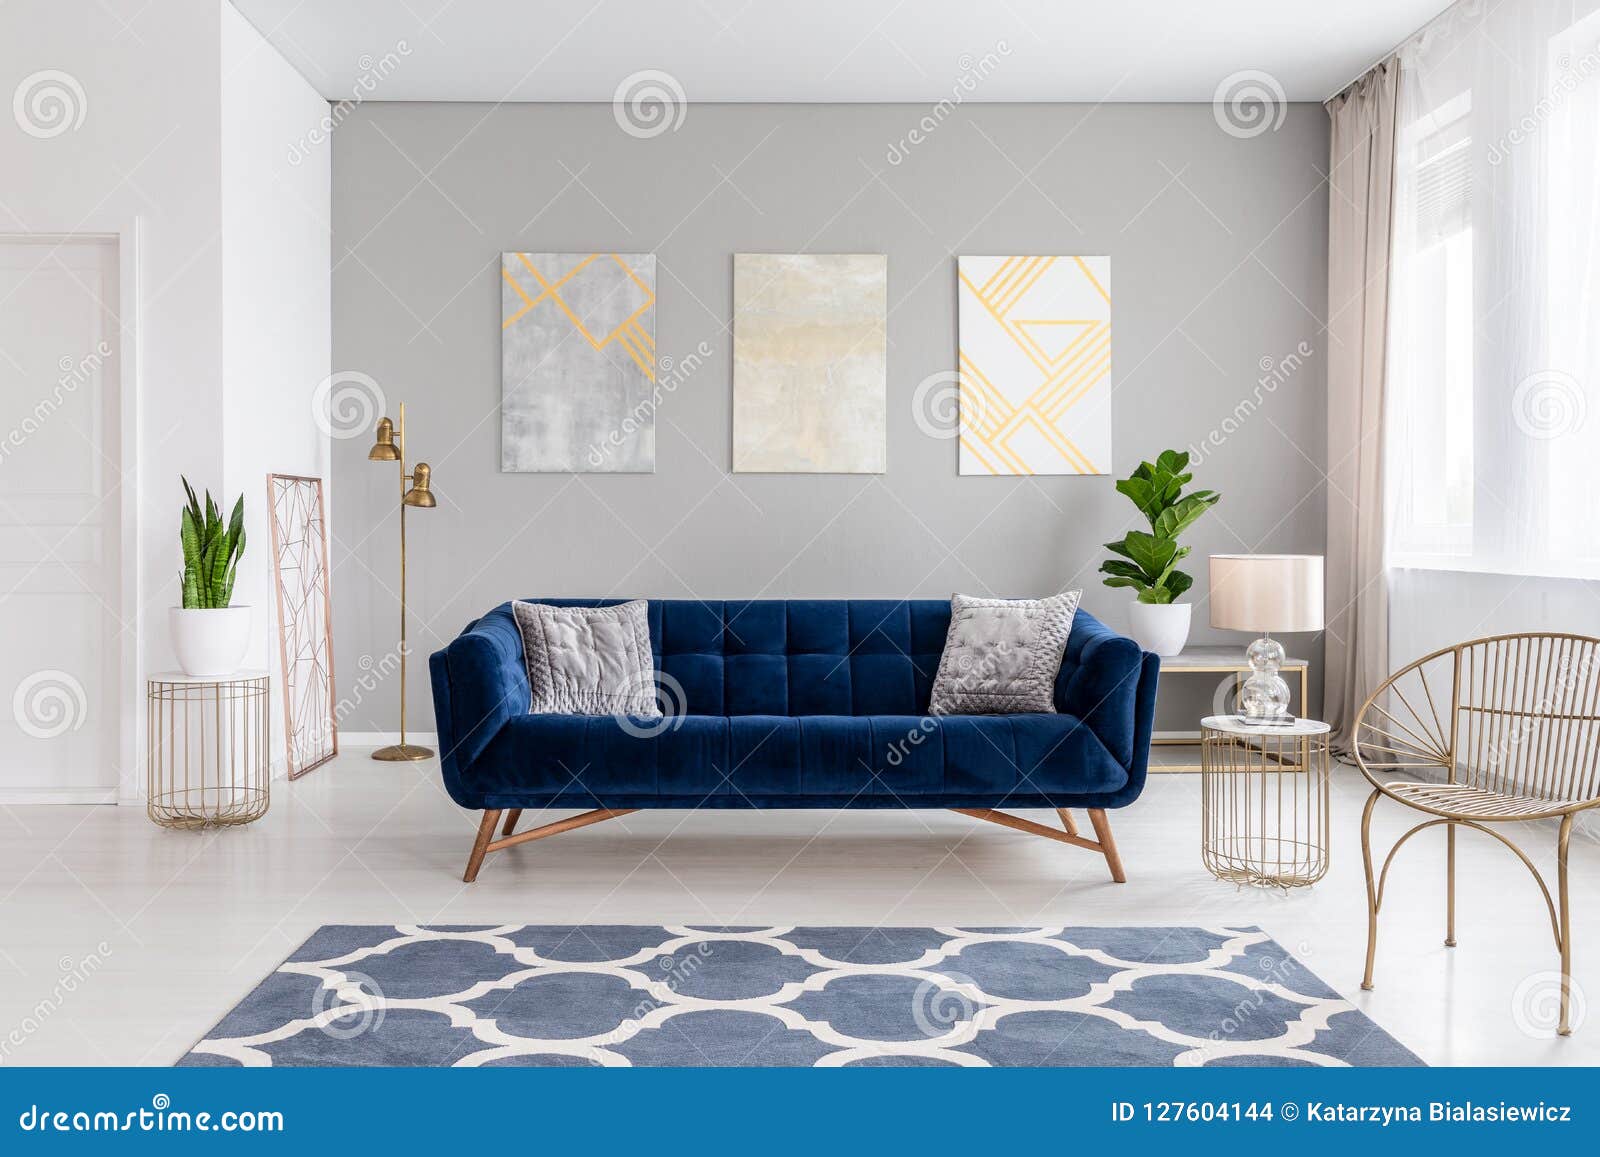 An Elegant Navy Blue Sofa In The Middle Of A Bright Living Room